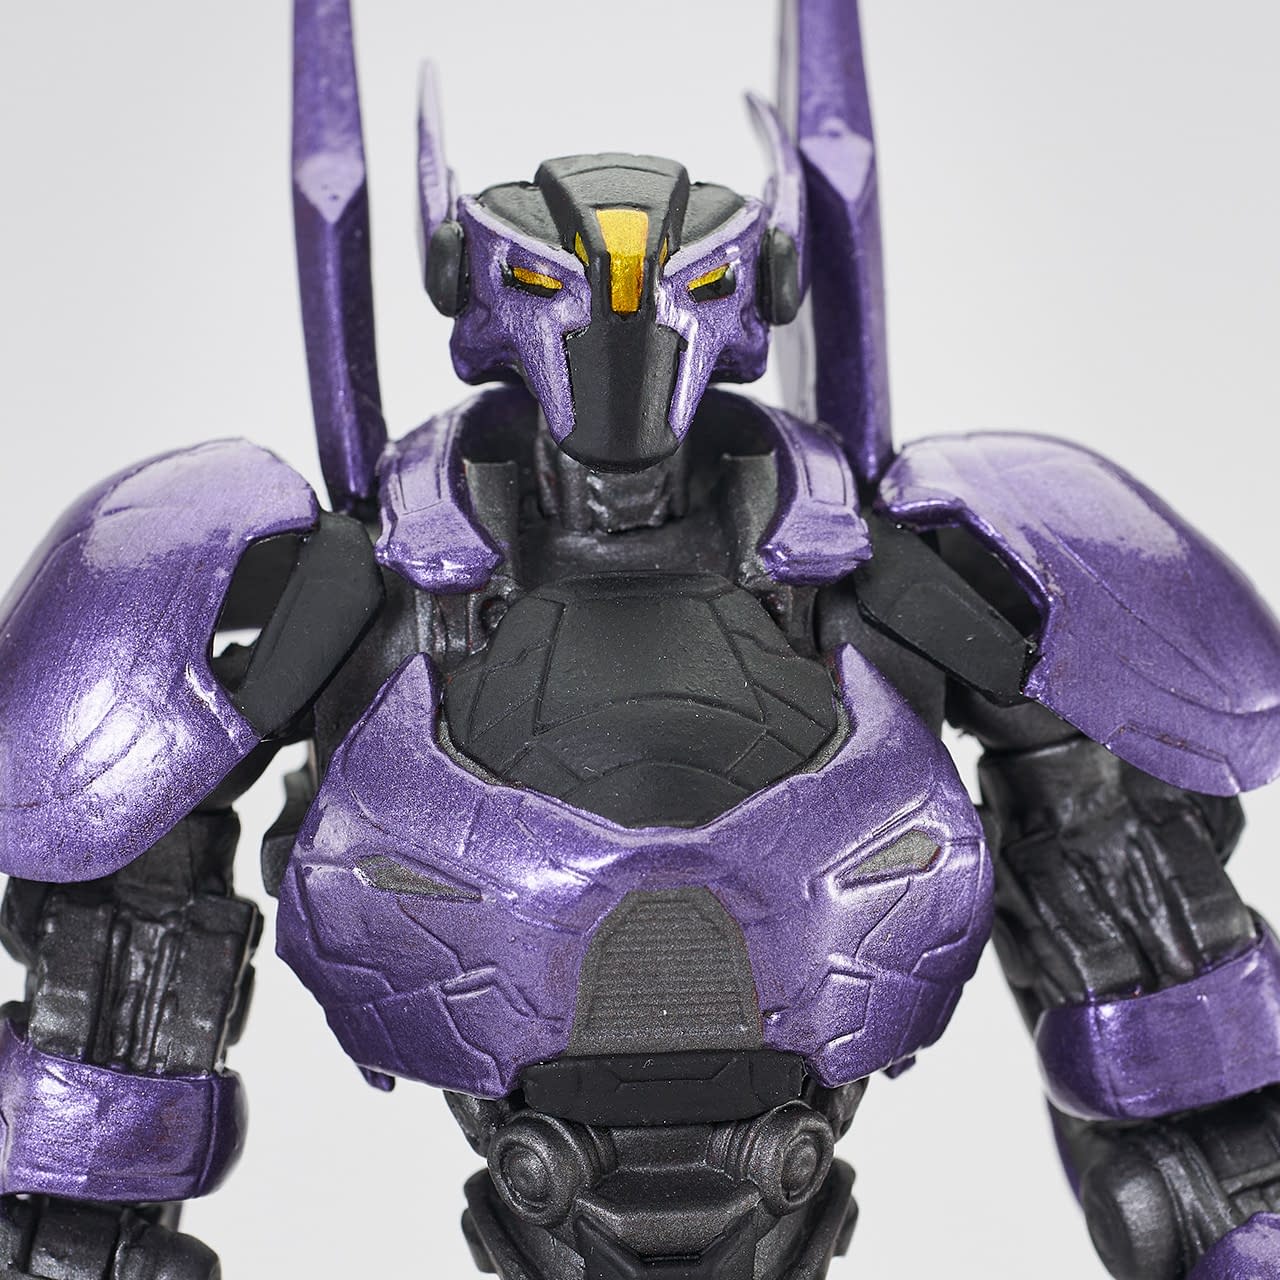 New Pacific Rim: Uprising Series 1 Figures Arrive from Diamond Select 